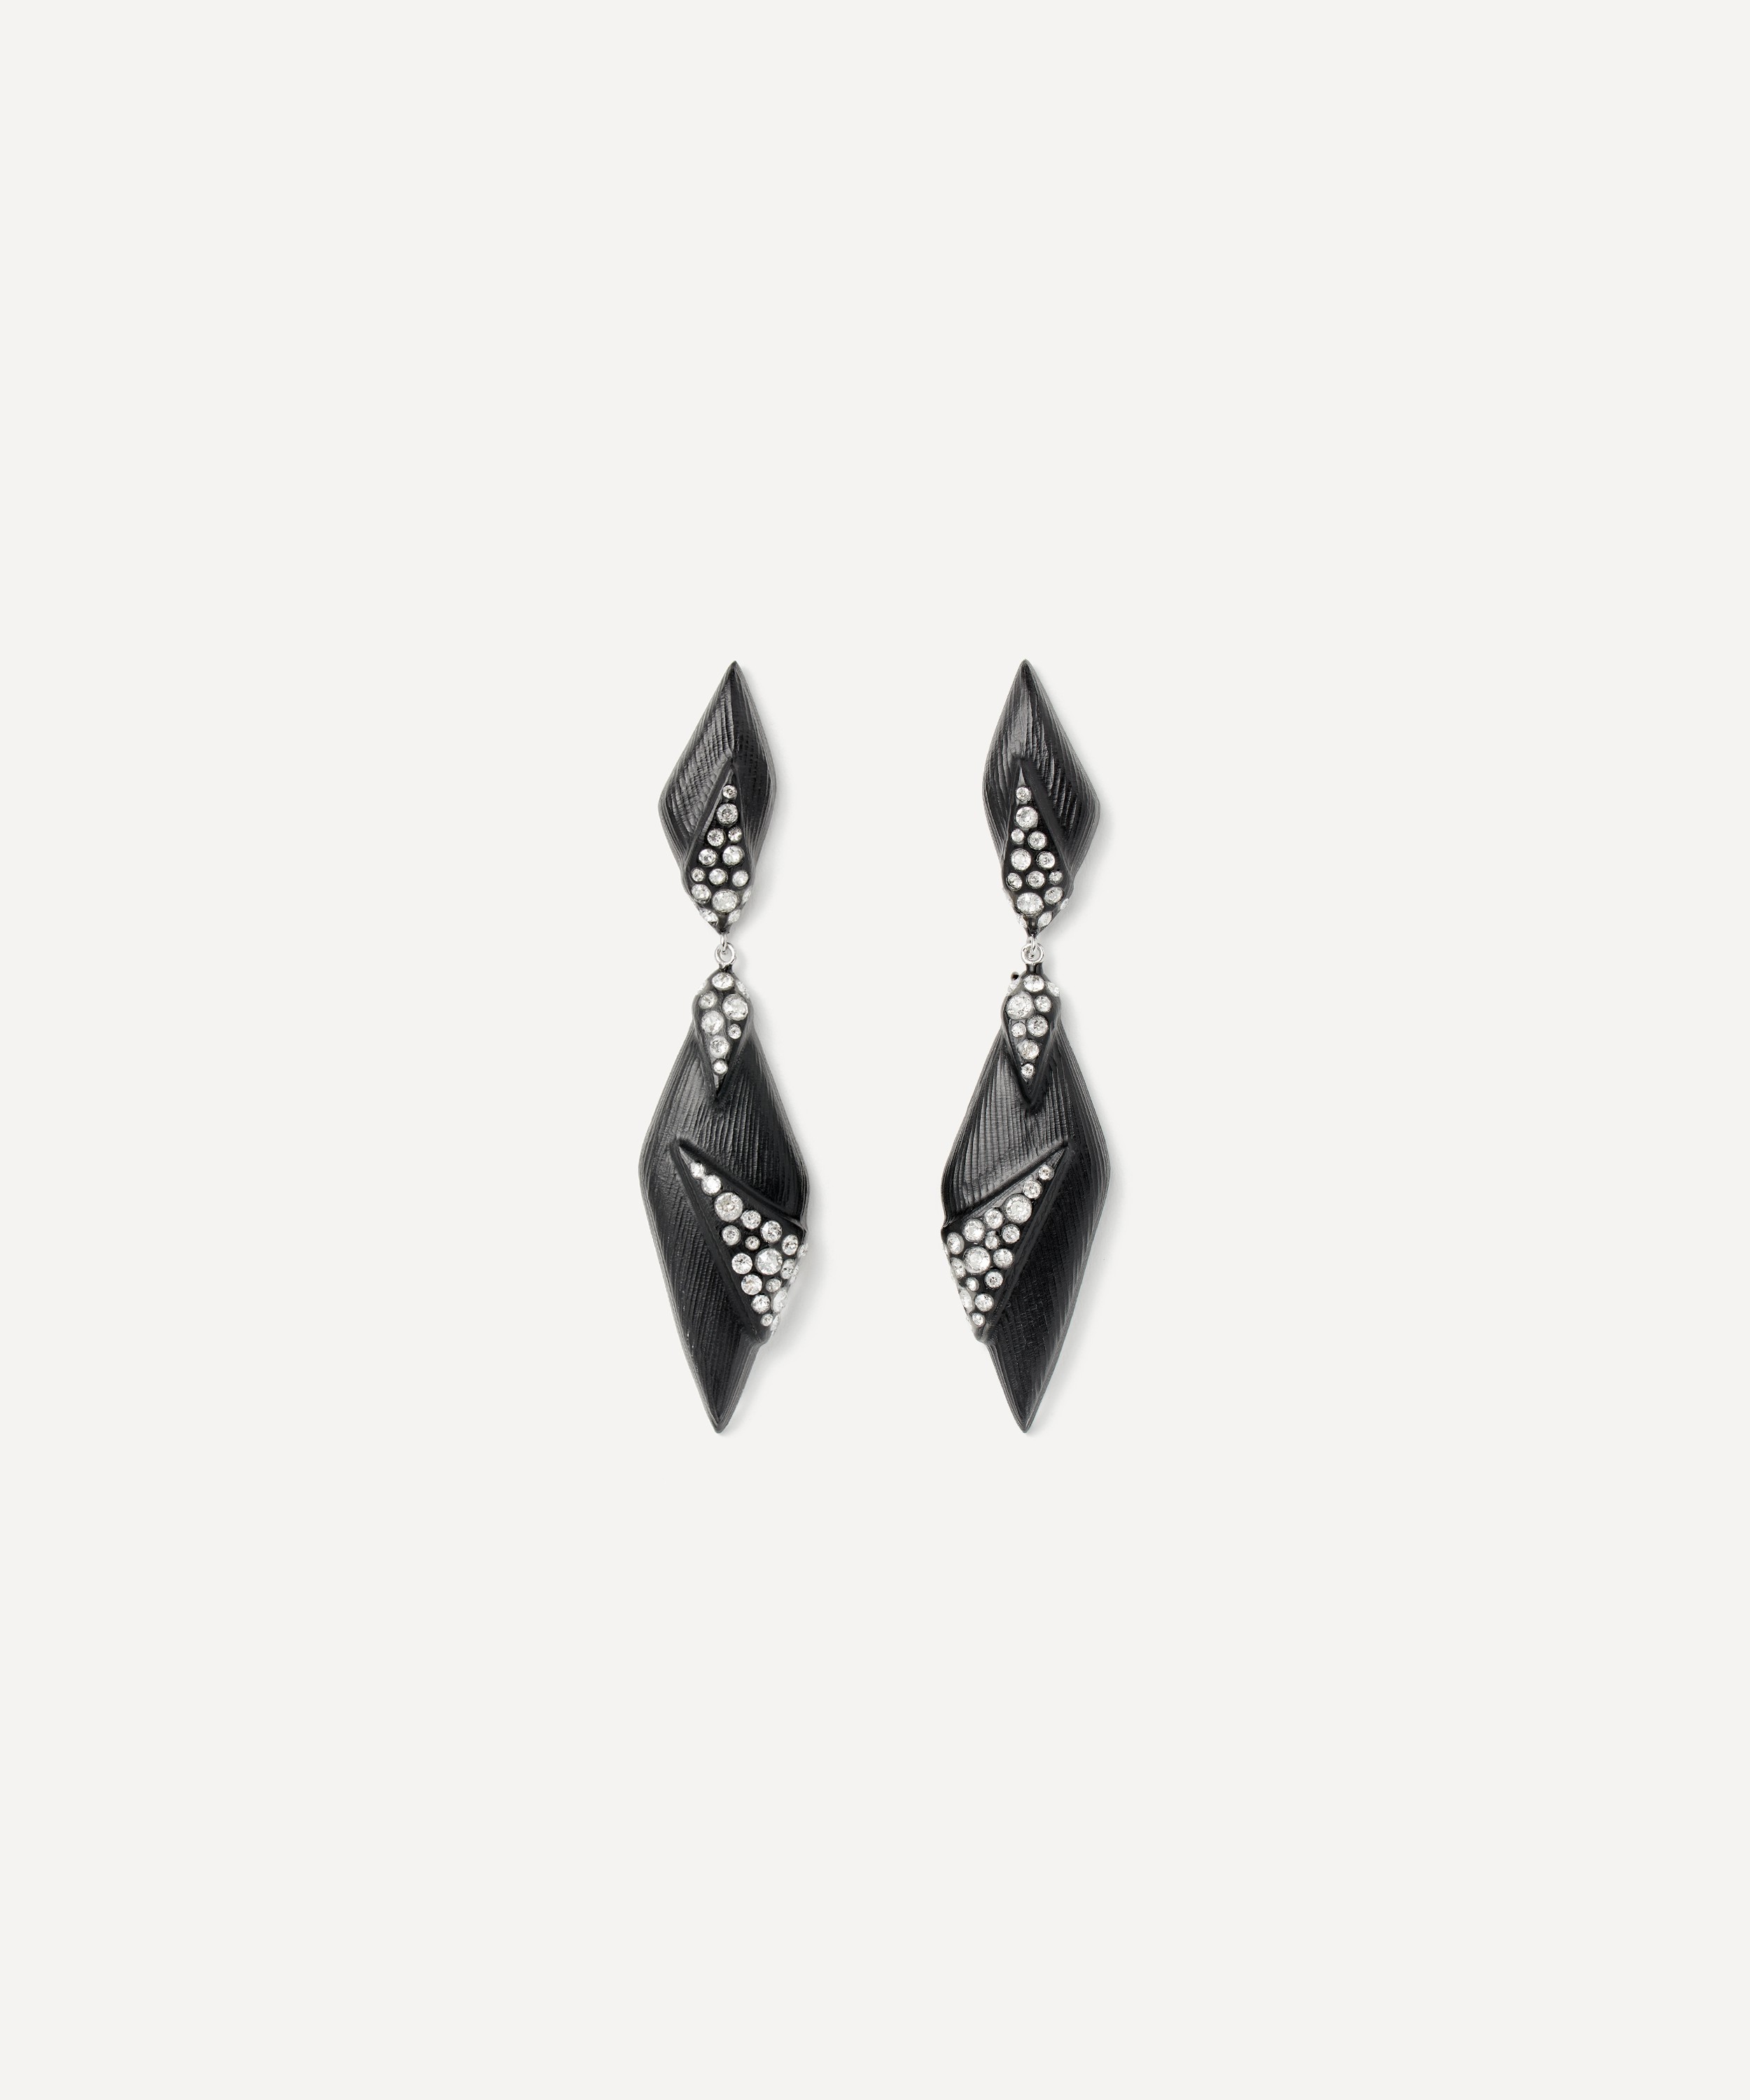 Alexis Bittar - Rhodium-Plated Punk Deco Lucite Crystal Drop Earrings